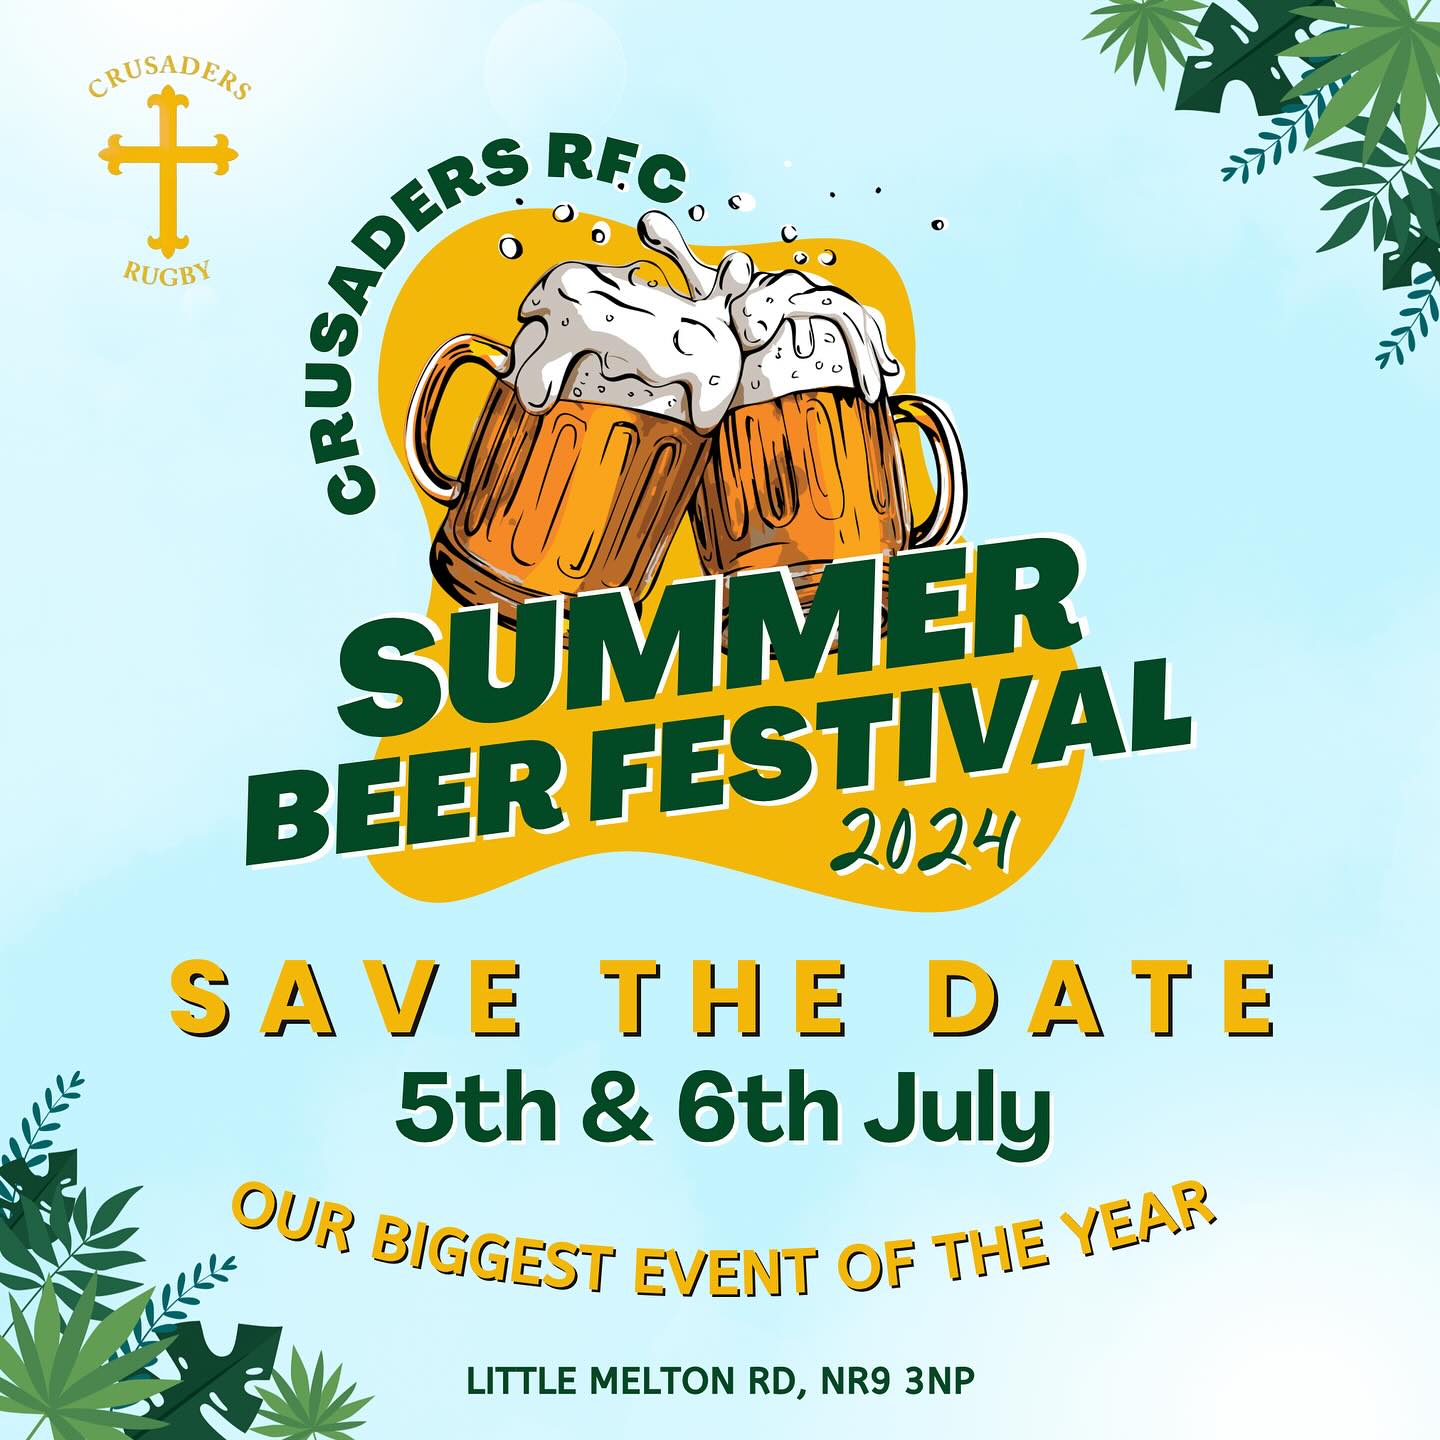 Summer Beer Festival – Crusaders Rugby Club, 5th & 6th July